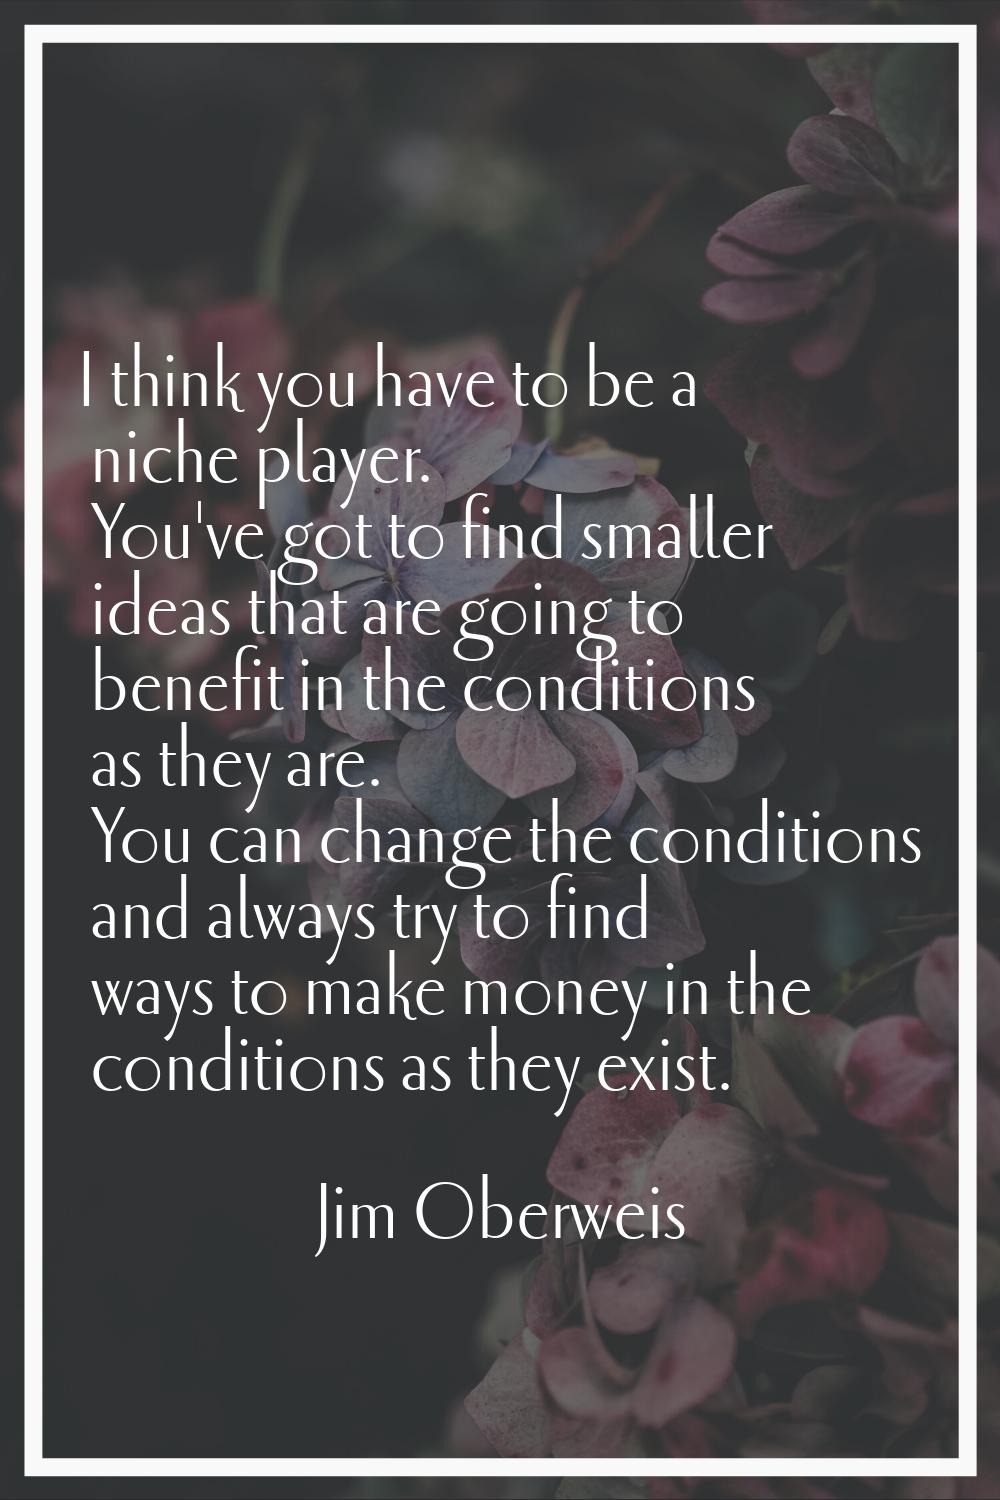 I think you have to be a niche player. You've got to find smaller ideas that are going to benefit i